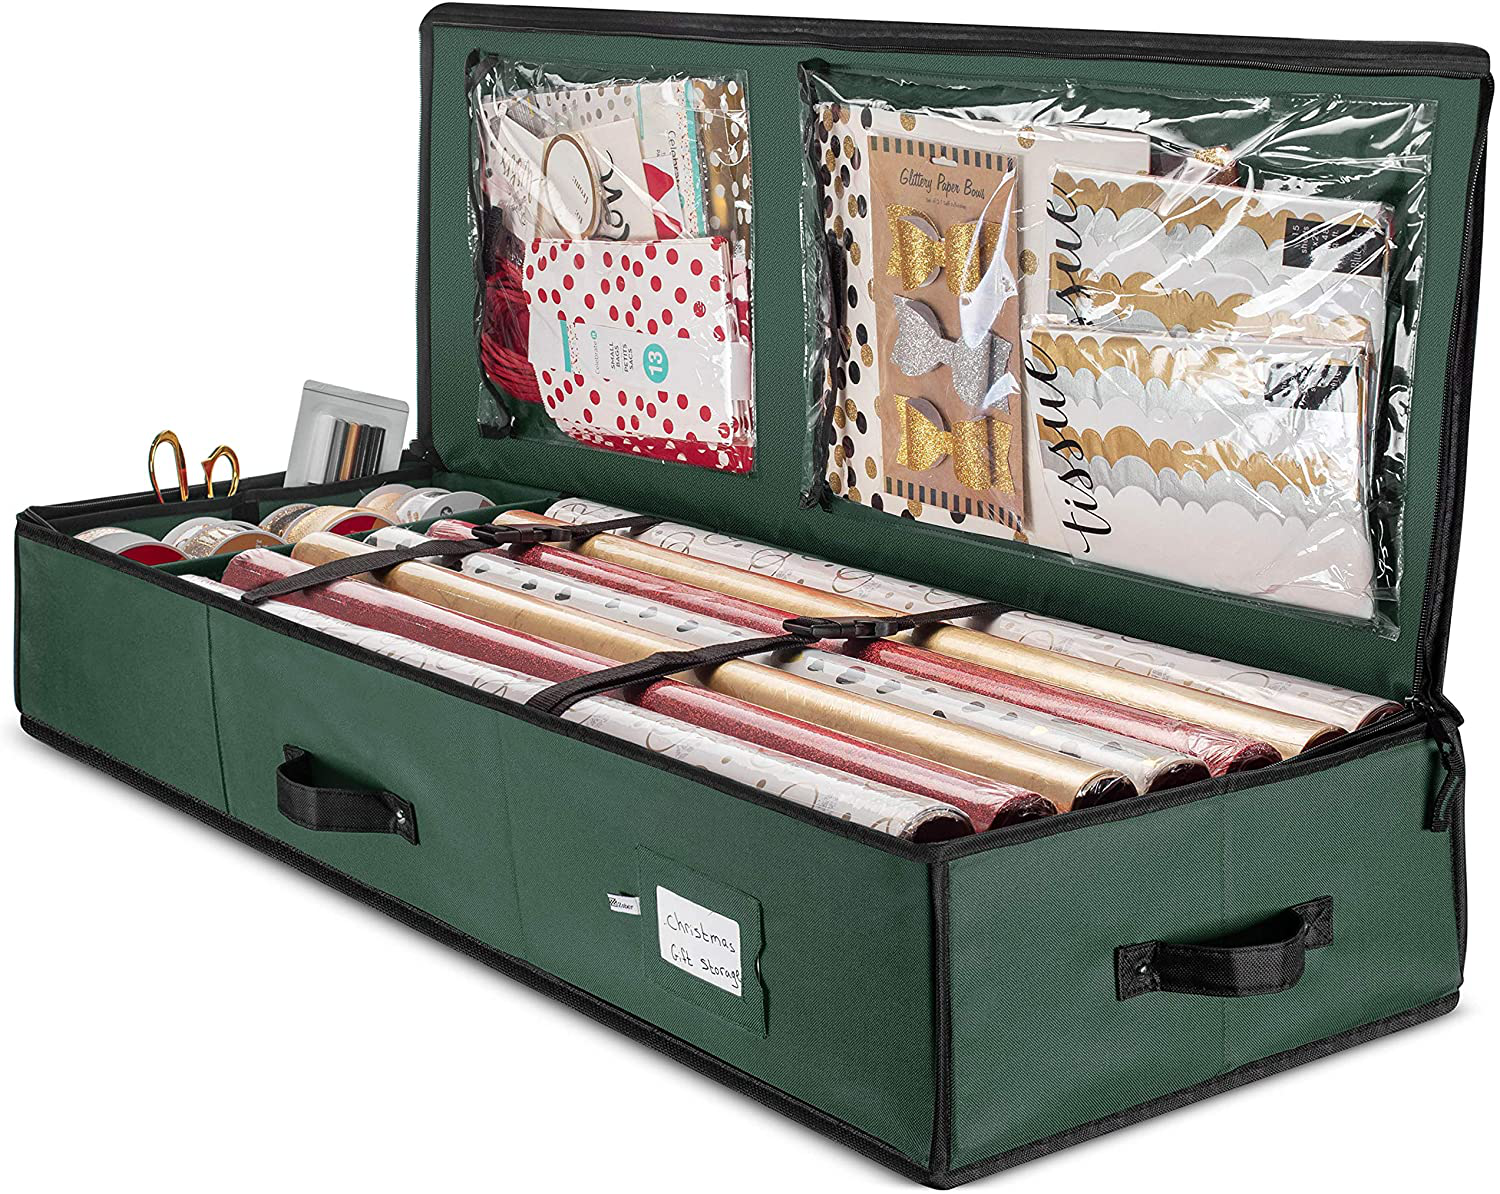 ZOBER Premium Wrap Organizer, Interior Pockets, Fits 18-24 Standers Rolls, Underbed Storage, Wrapping Paper Storage Box and Holiday Accessories, 40” Long - Tear-Proof Fabric - 5-Year Warranty